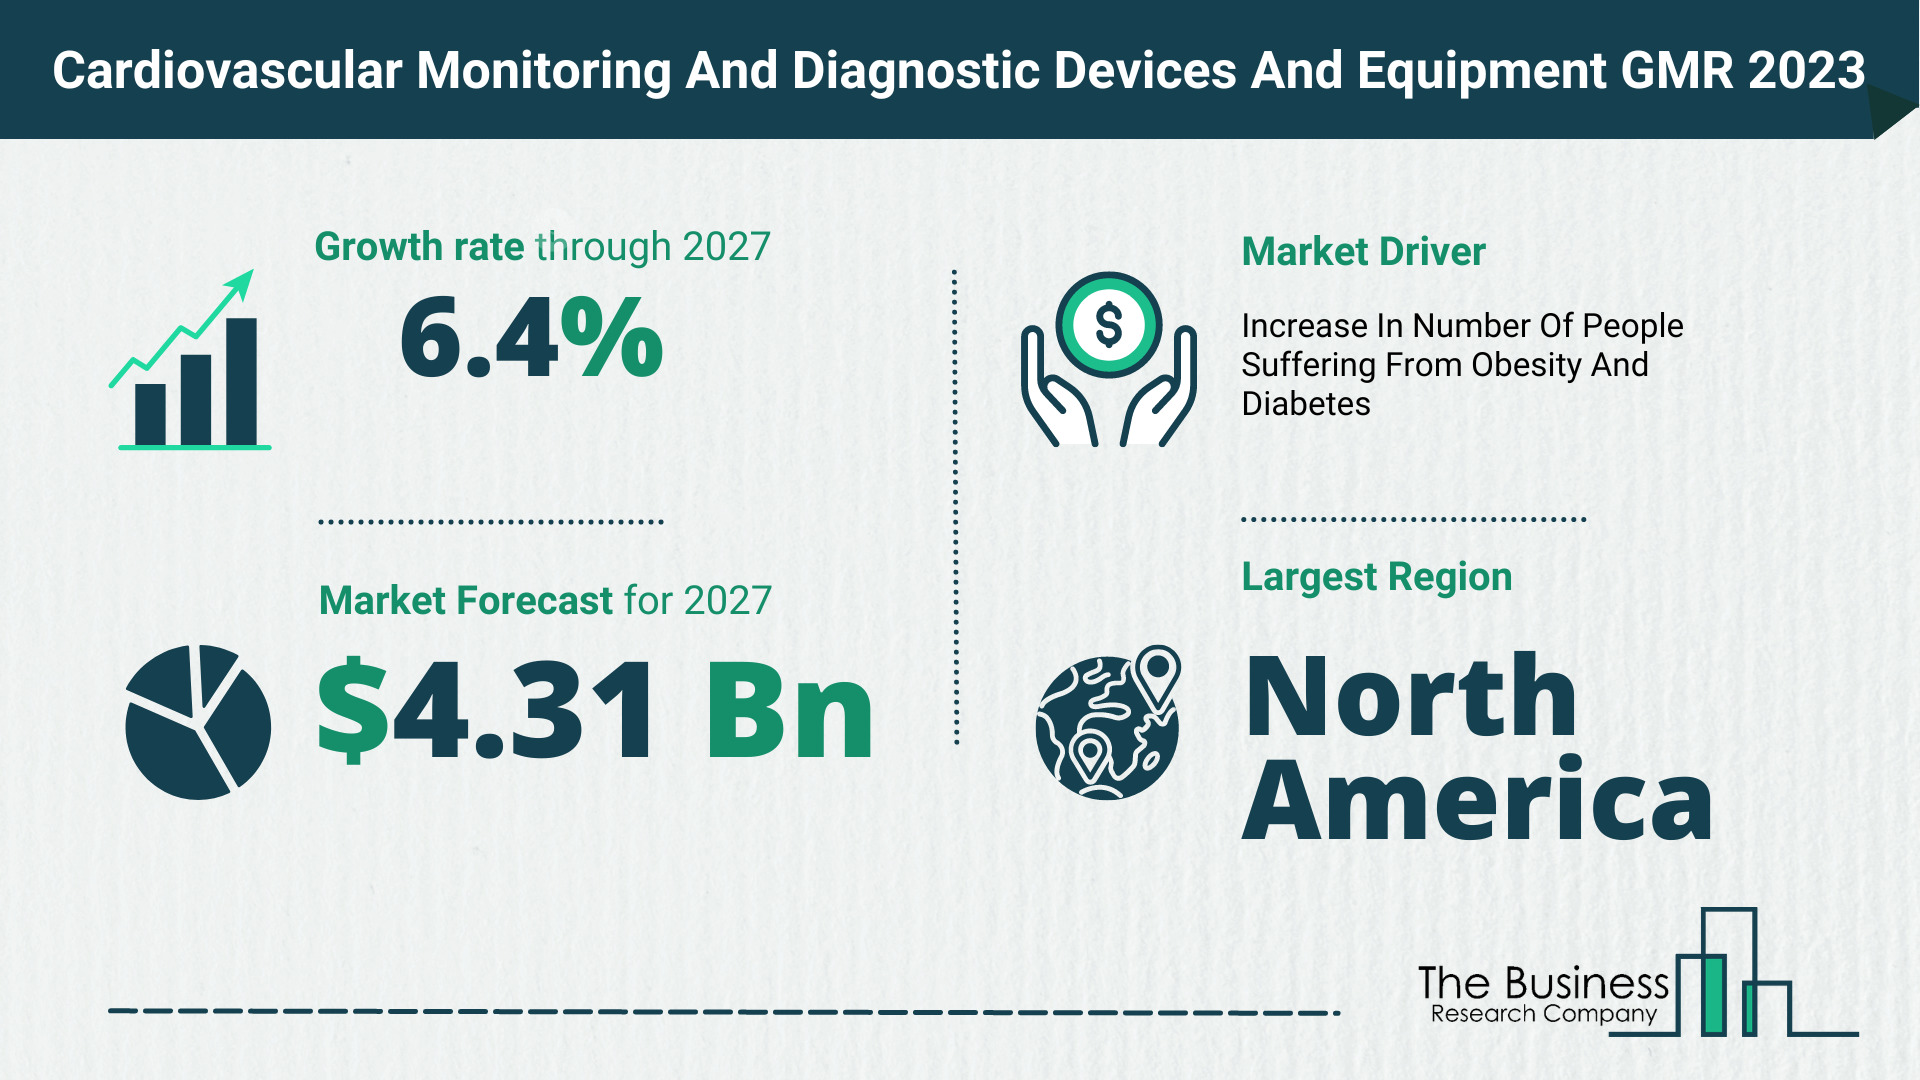 Global Cardiovascular Monitoring And Diagnostic Devices And Equipment Market,